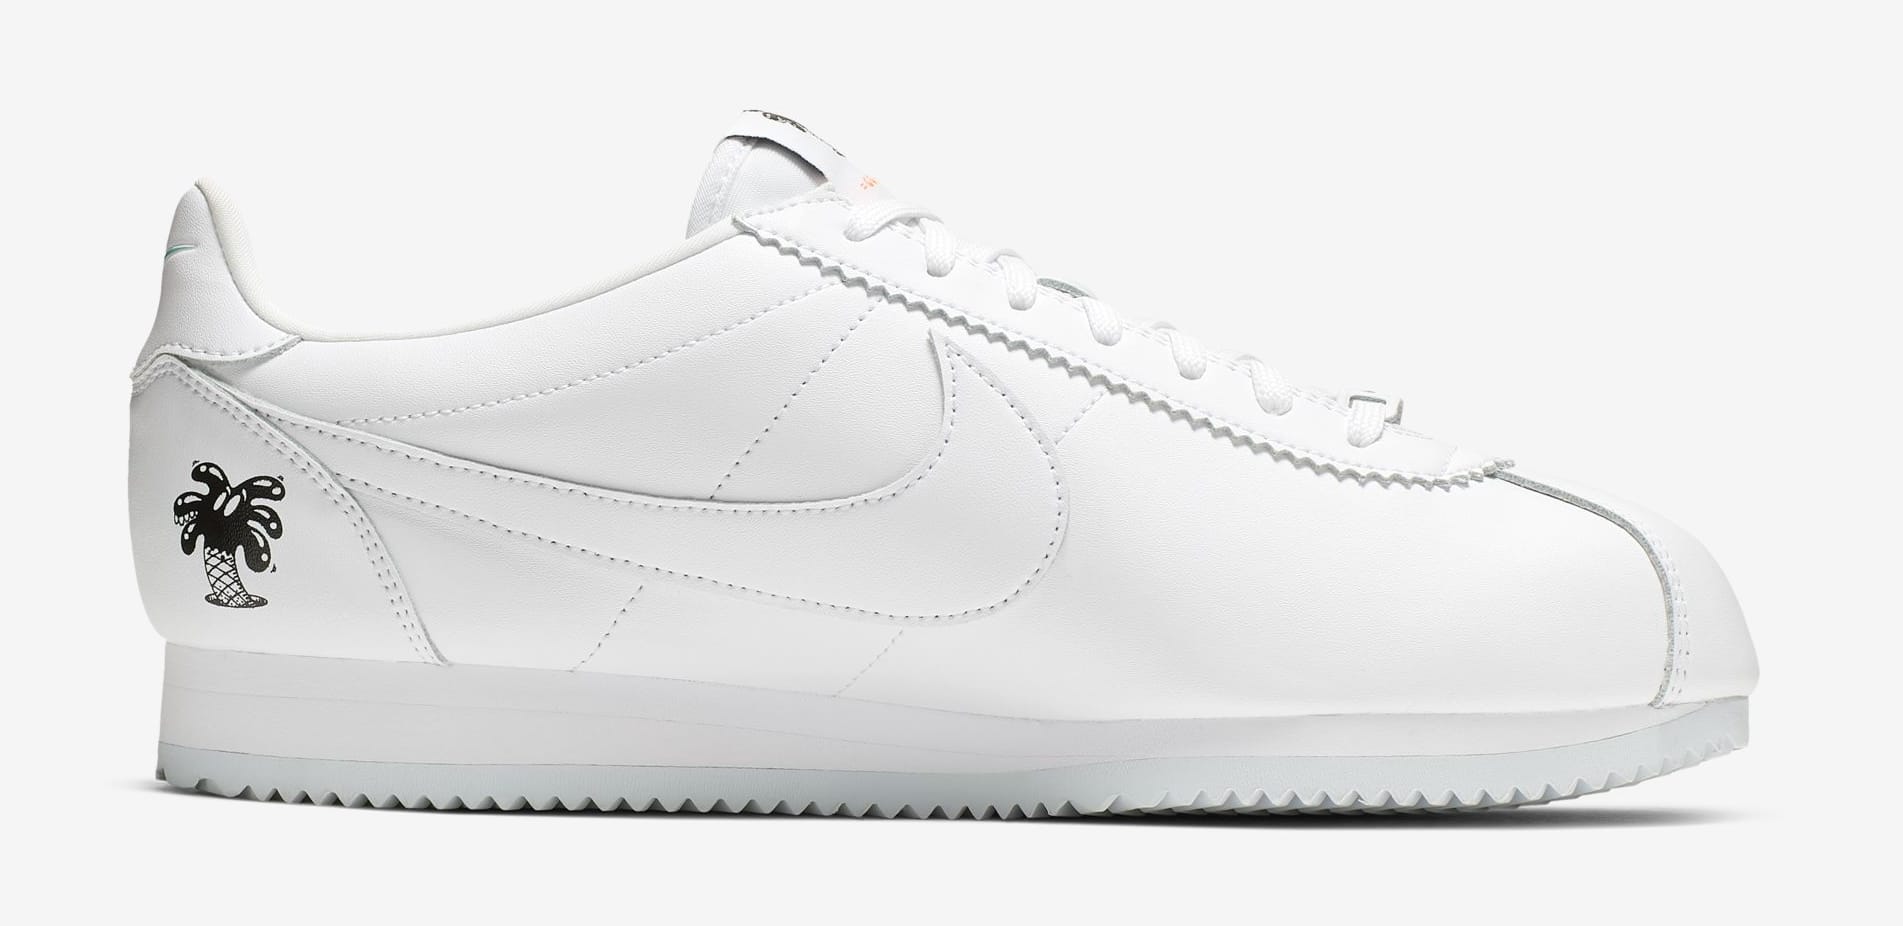 Nike Cortez Earth Day Collection Medial